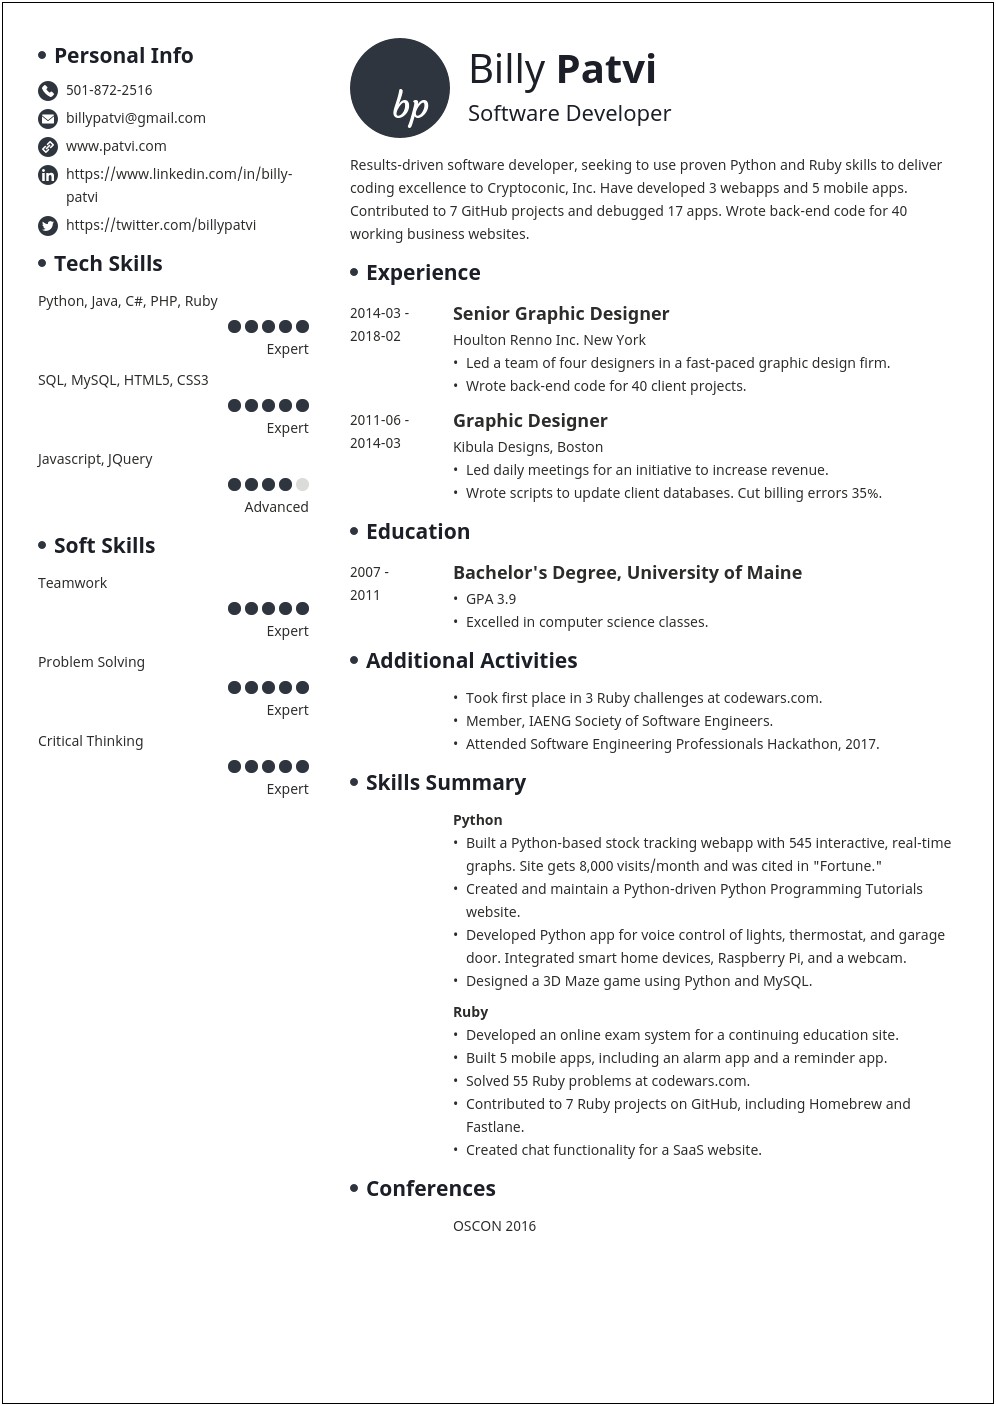 Example Resume Summarrys For Change Of Career